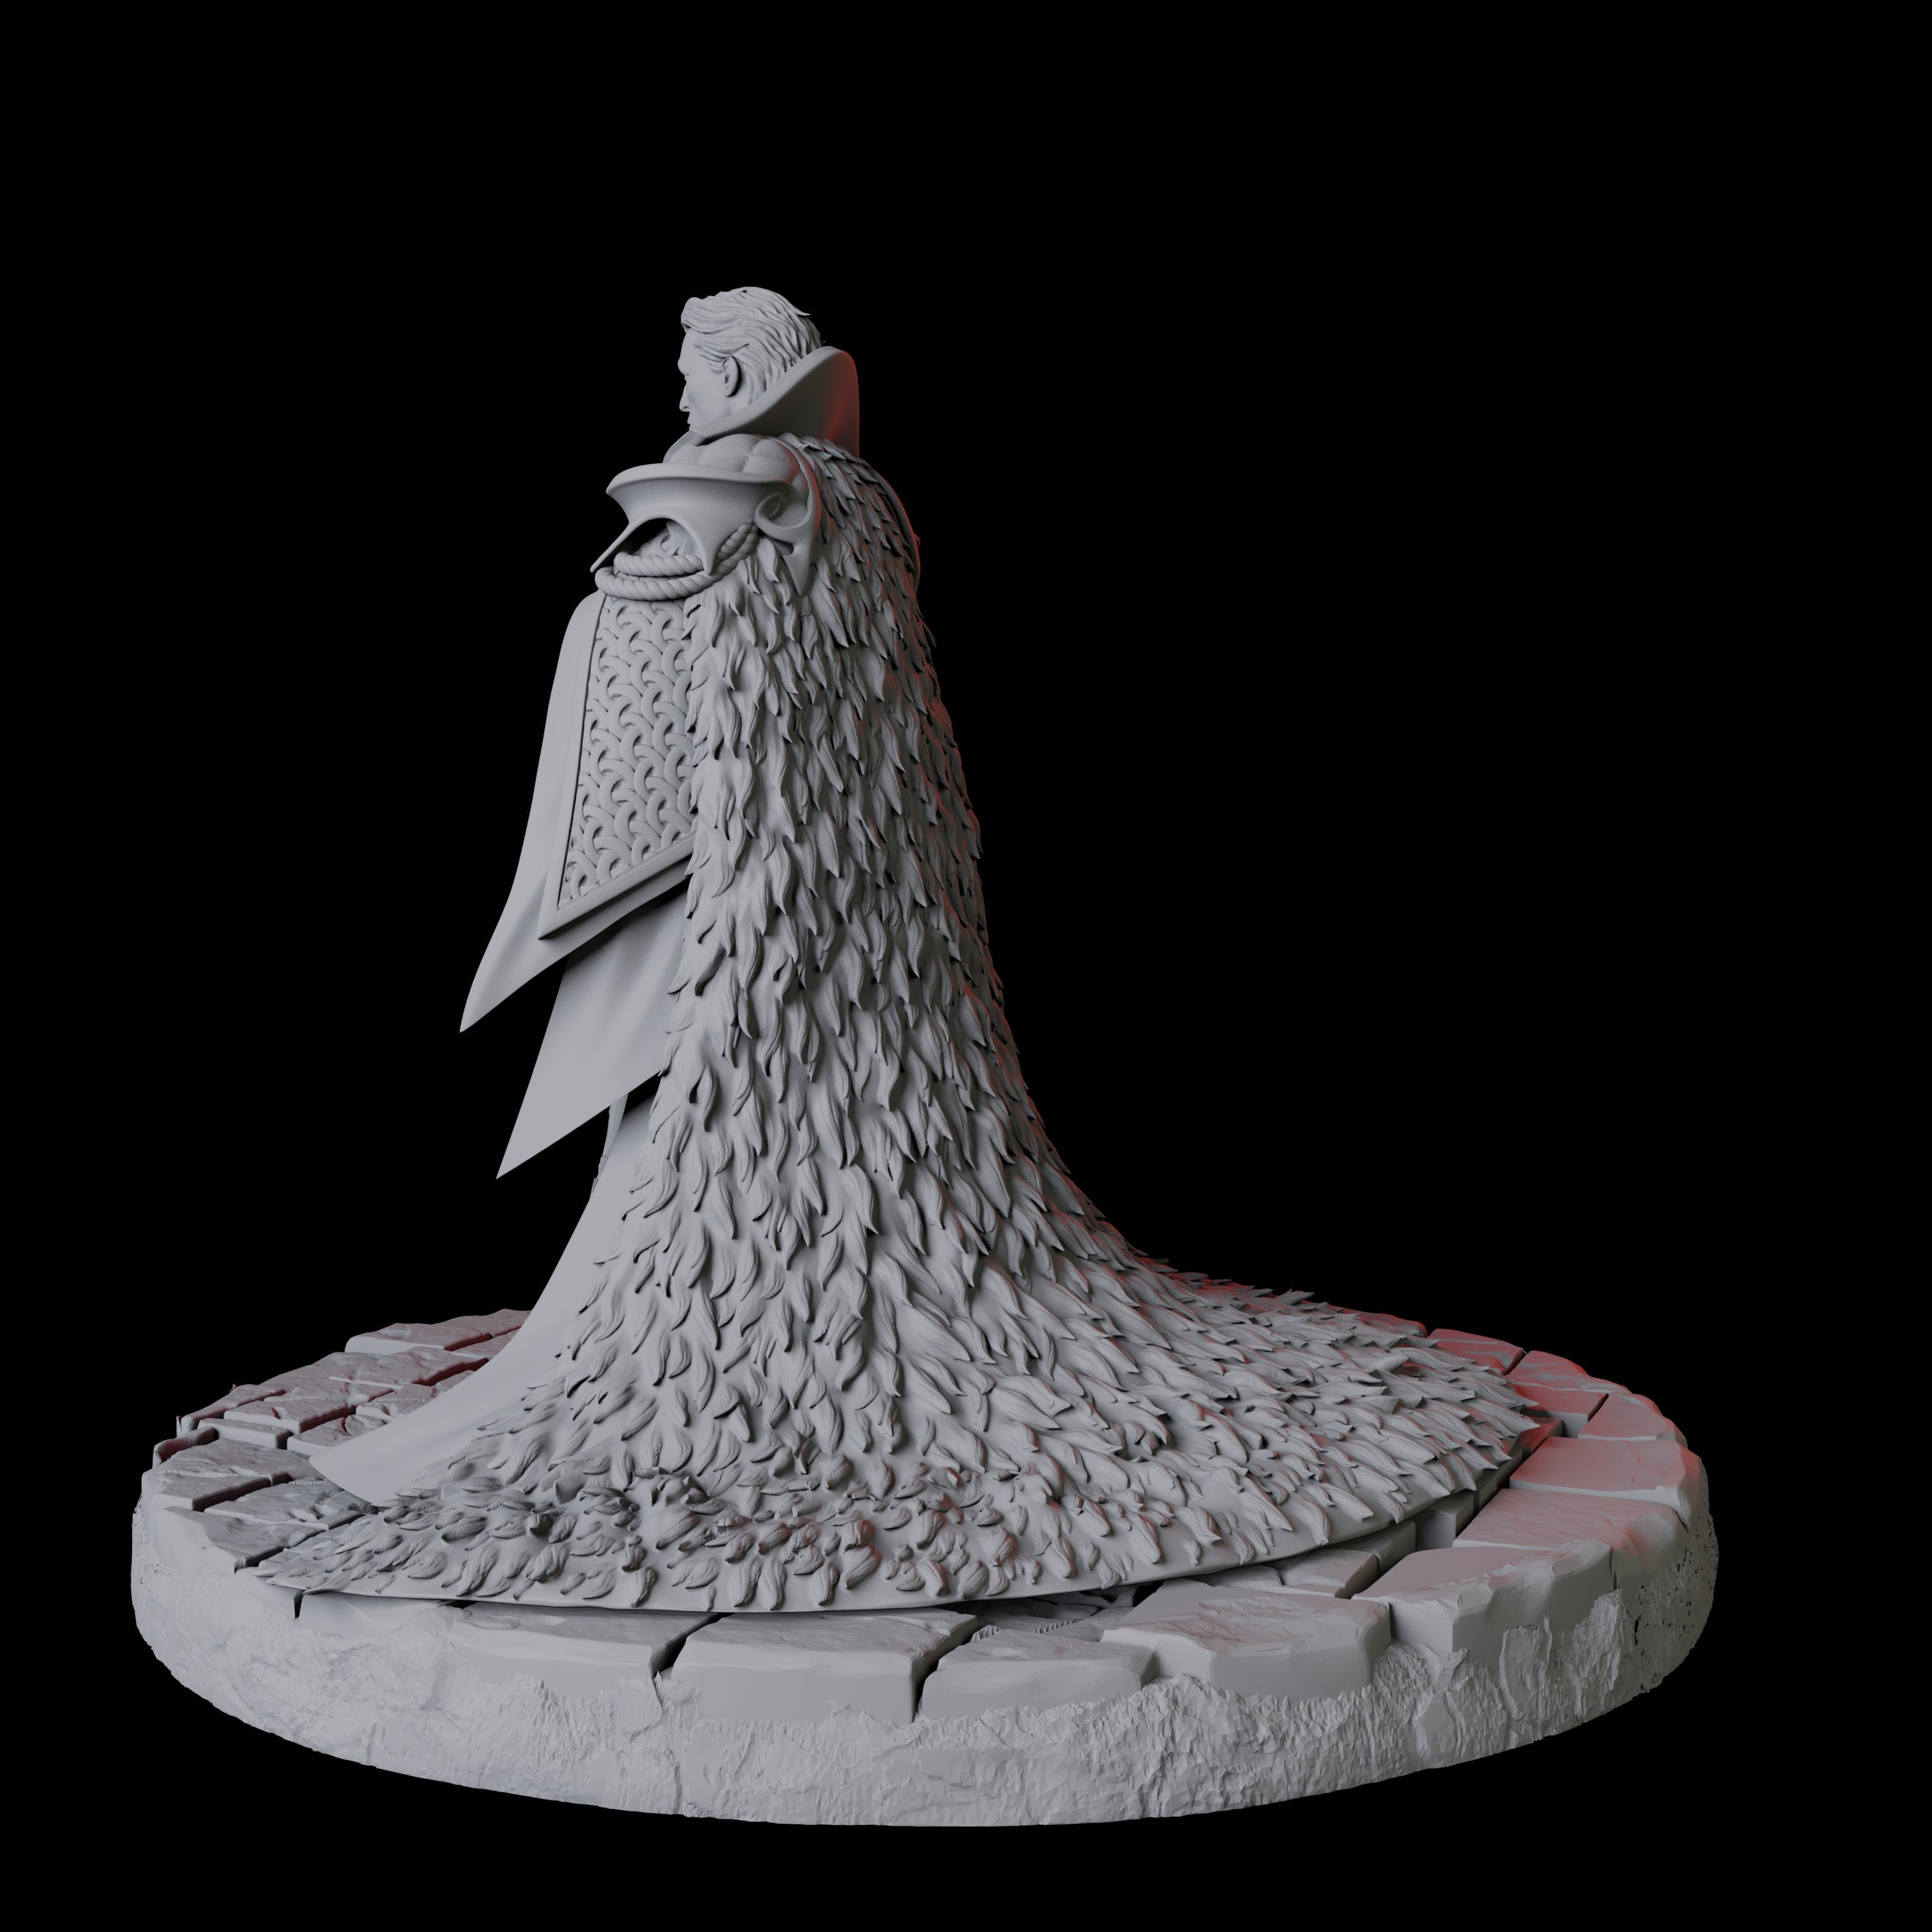 Count Dracula Miniature for Dungeons and Dragons, Pathfinder or other TTRPGs